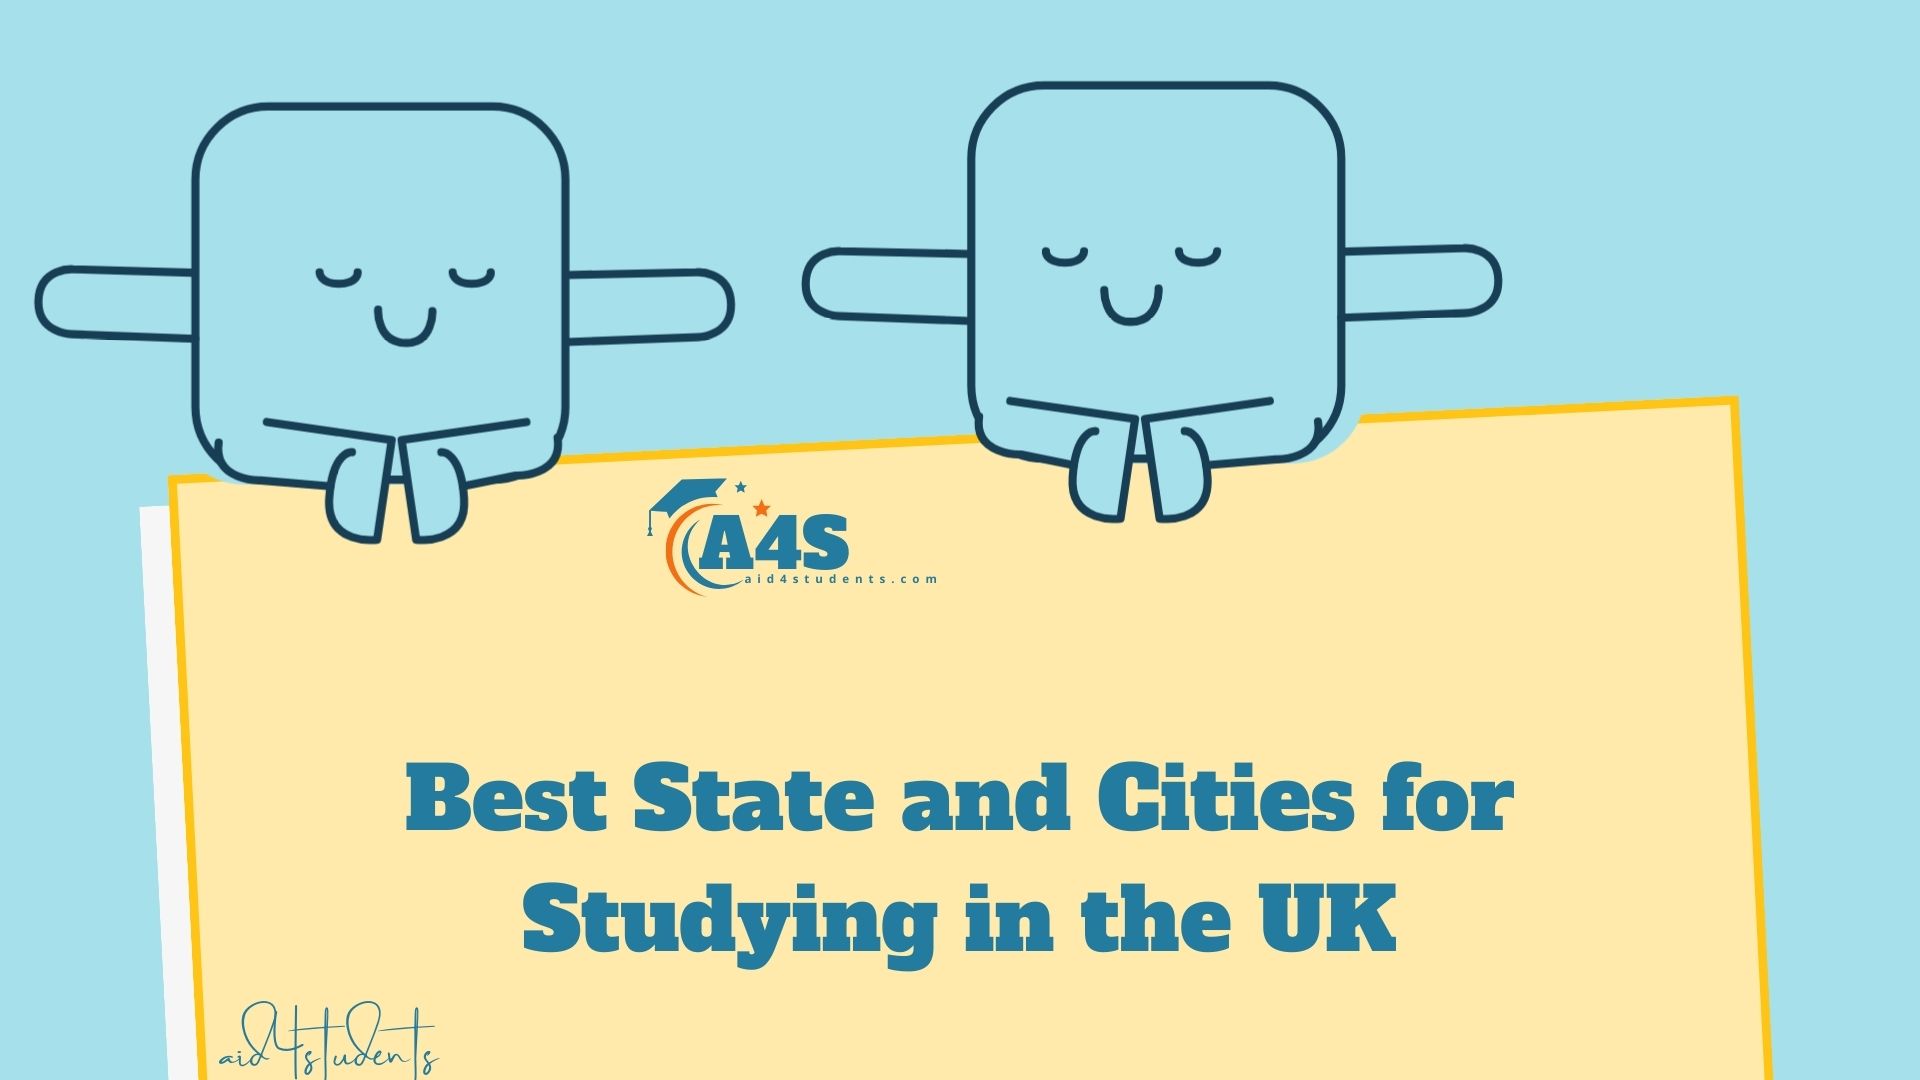 Best State and Cities for Studying in the UK